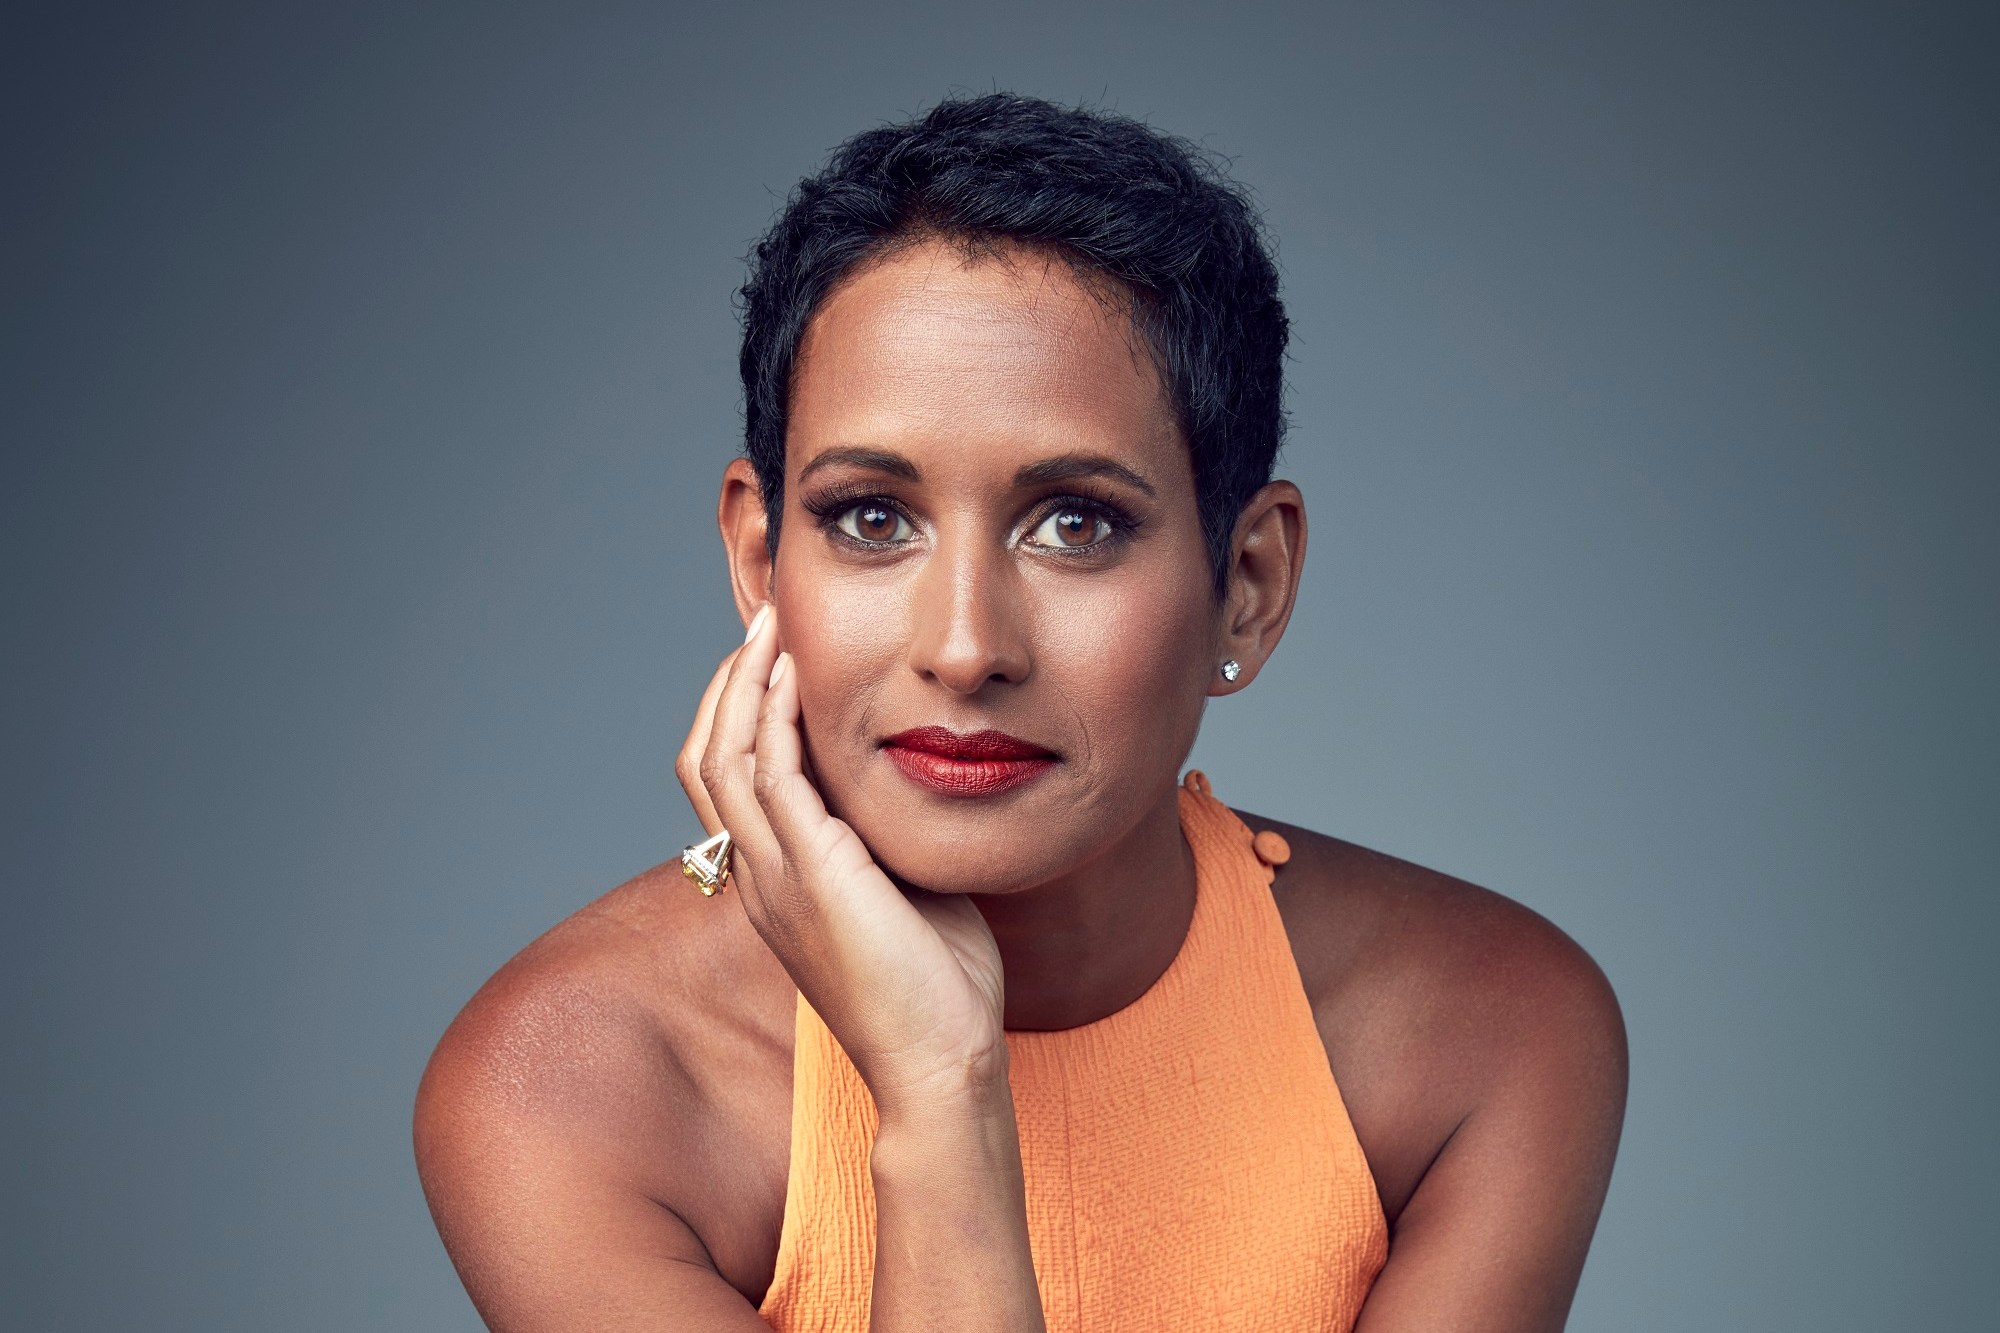 Naga Munchetty: ‘One person’s spiky is another person’s assertive’